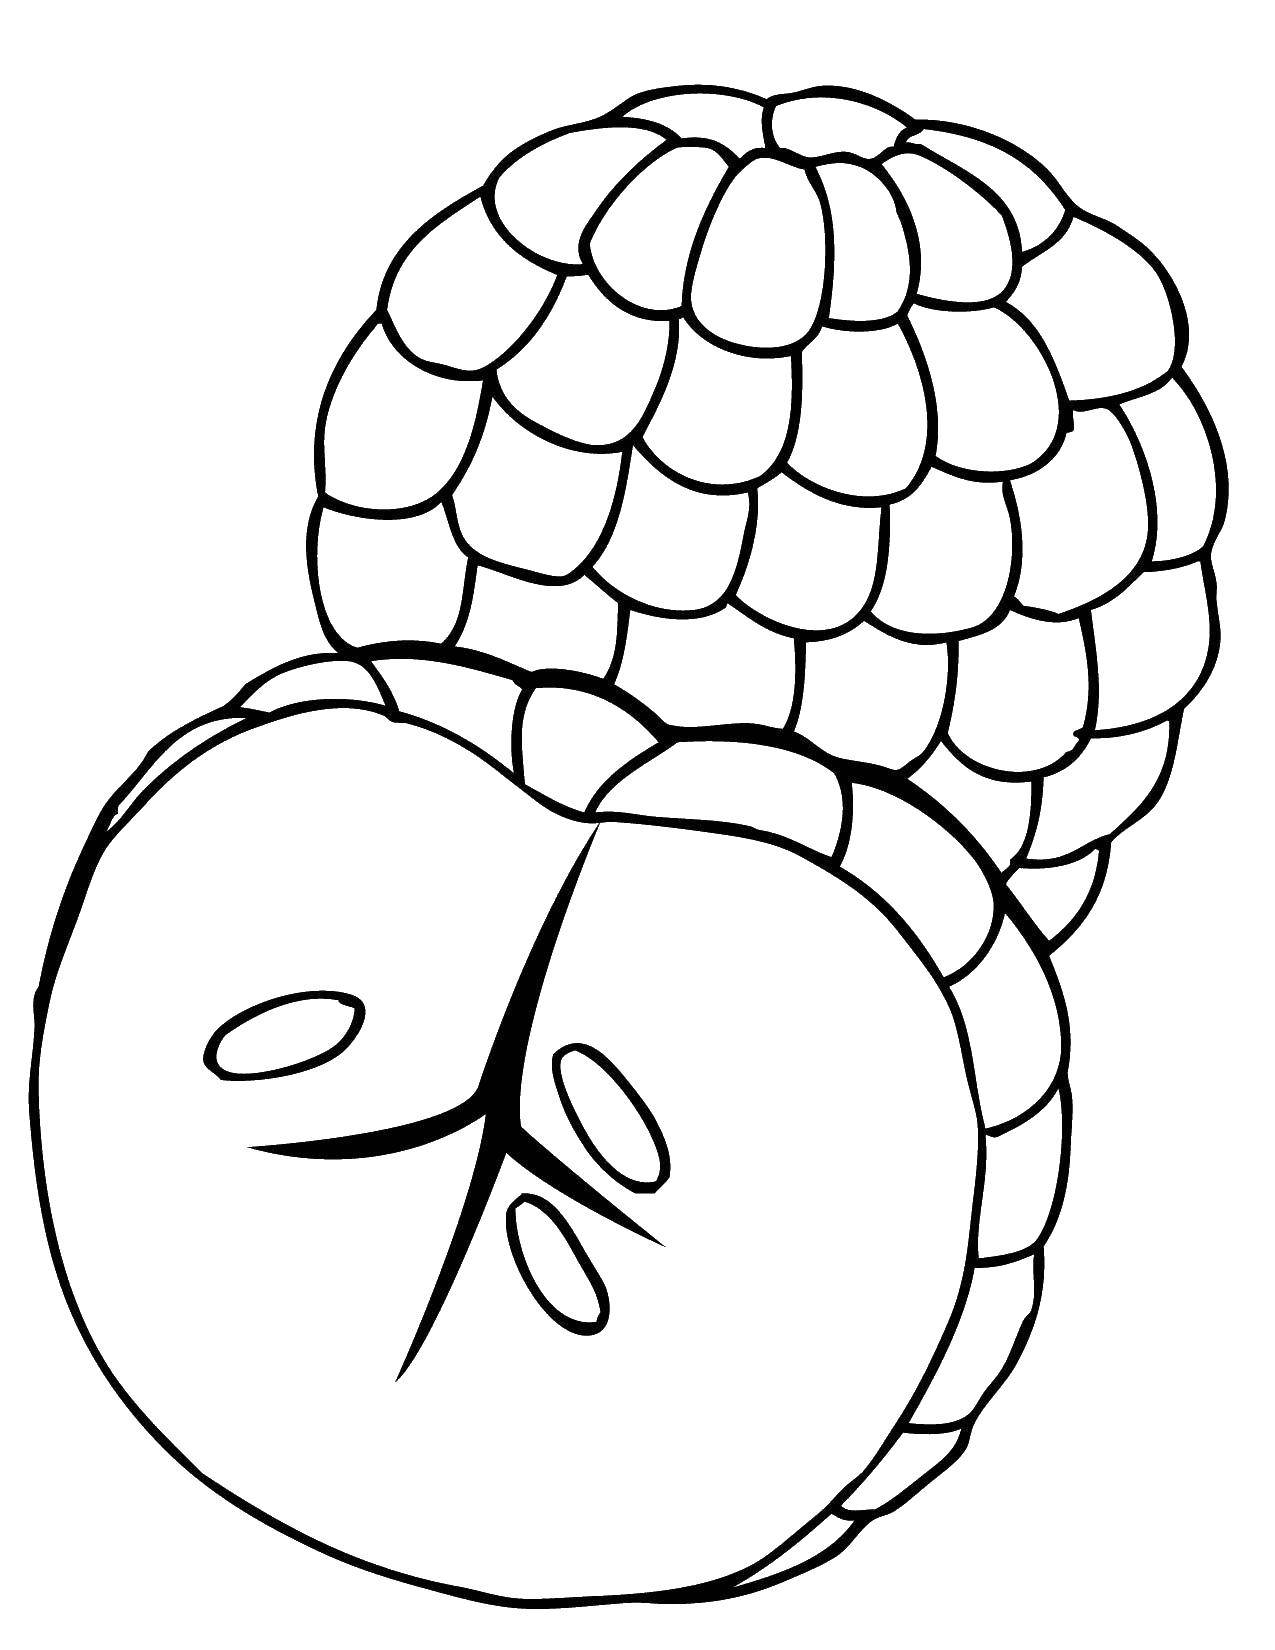 Coloring Raspberry. Category fruits. Tags:  raspberry , fruit.